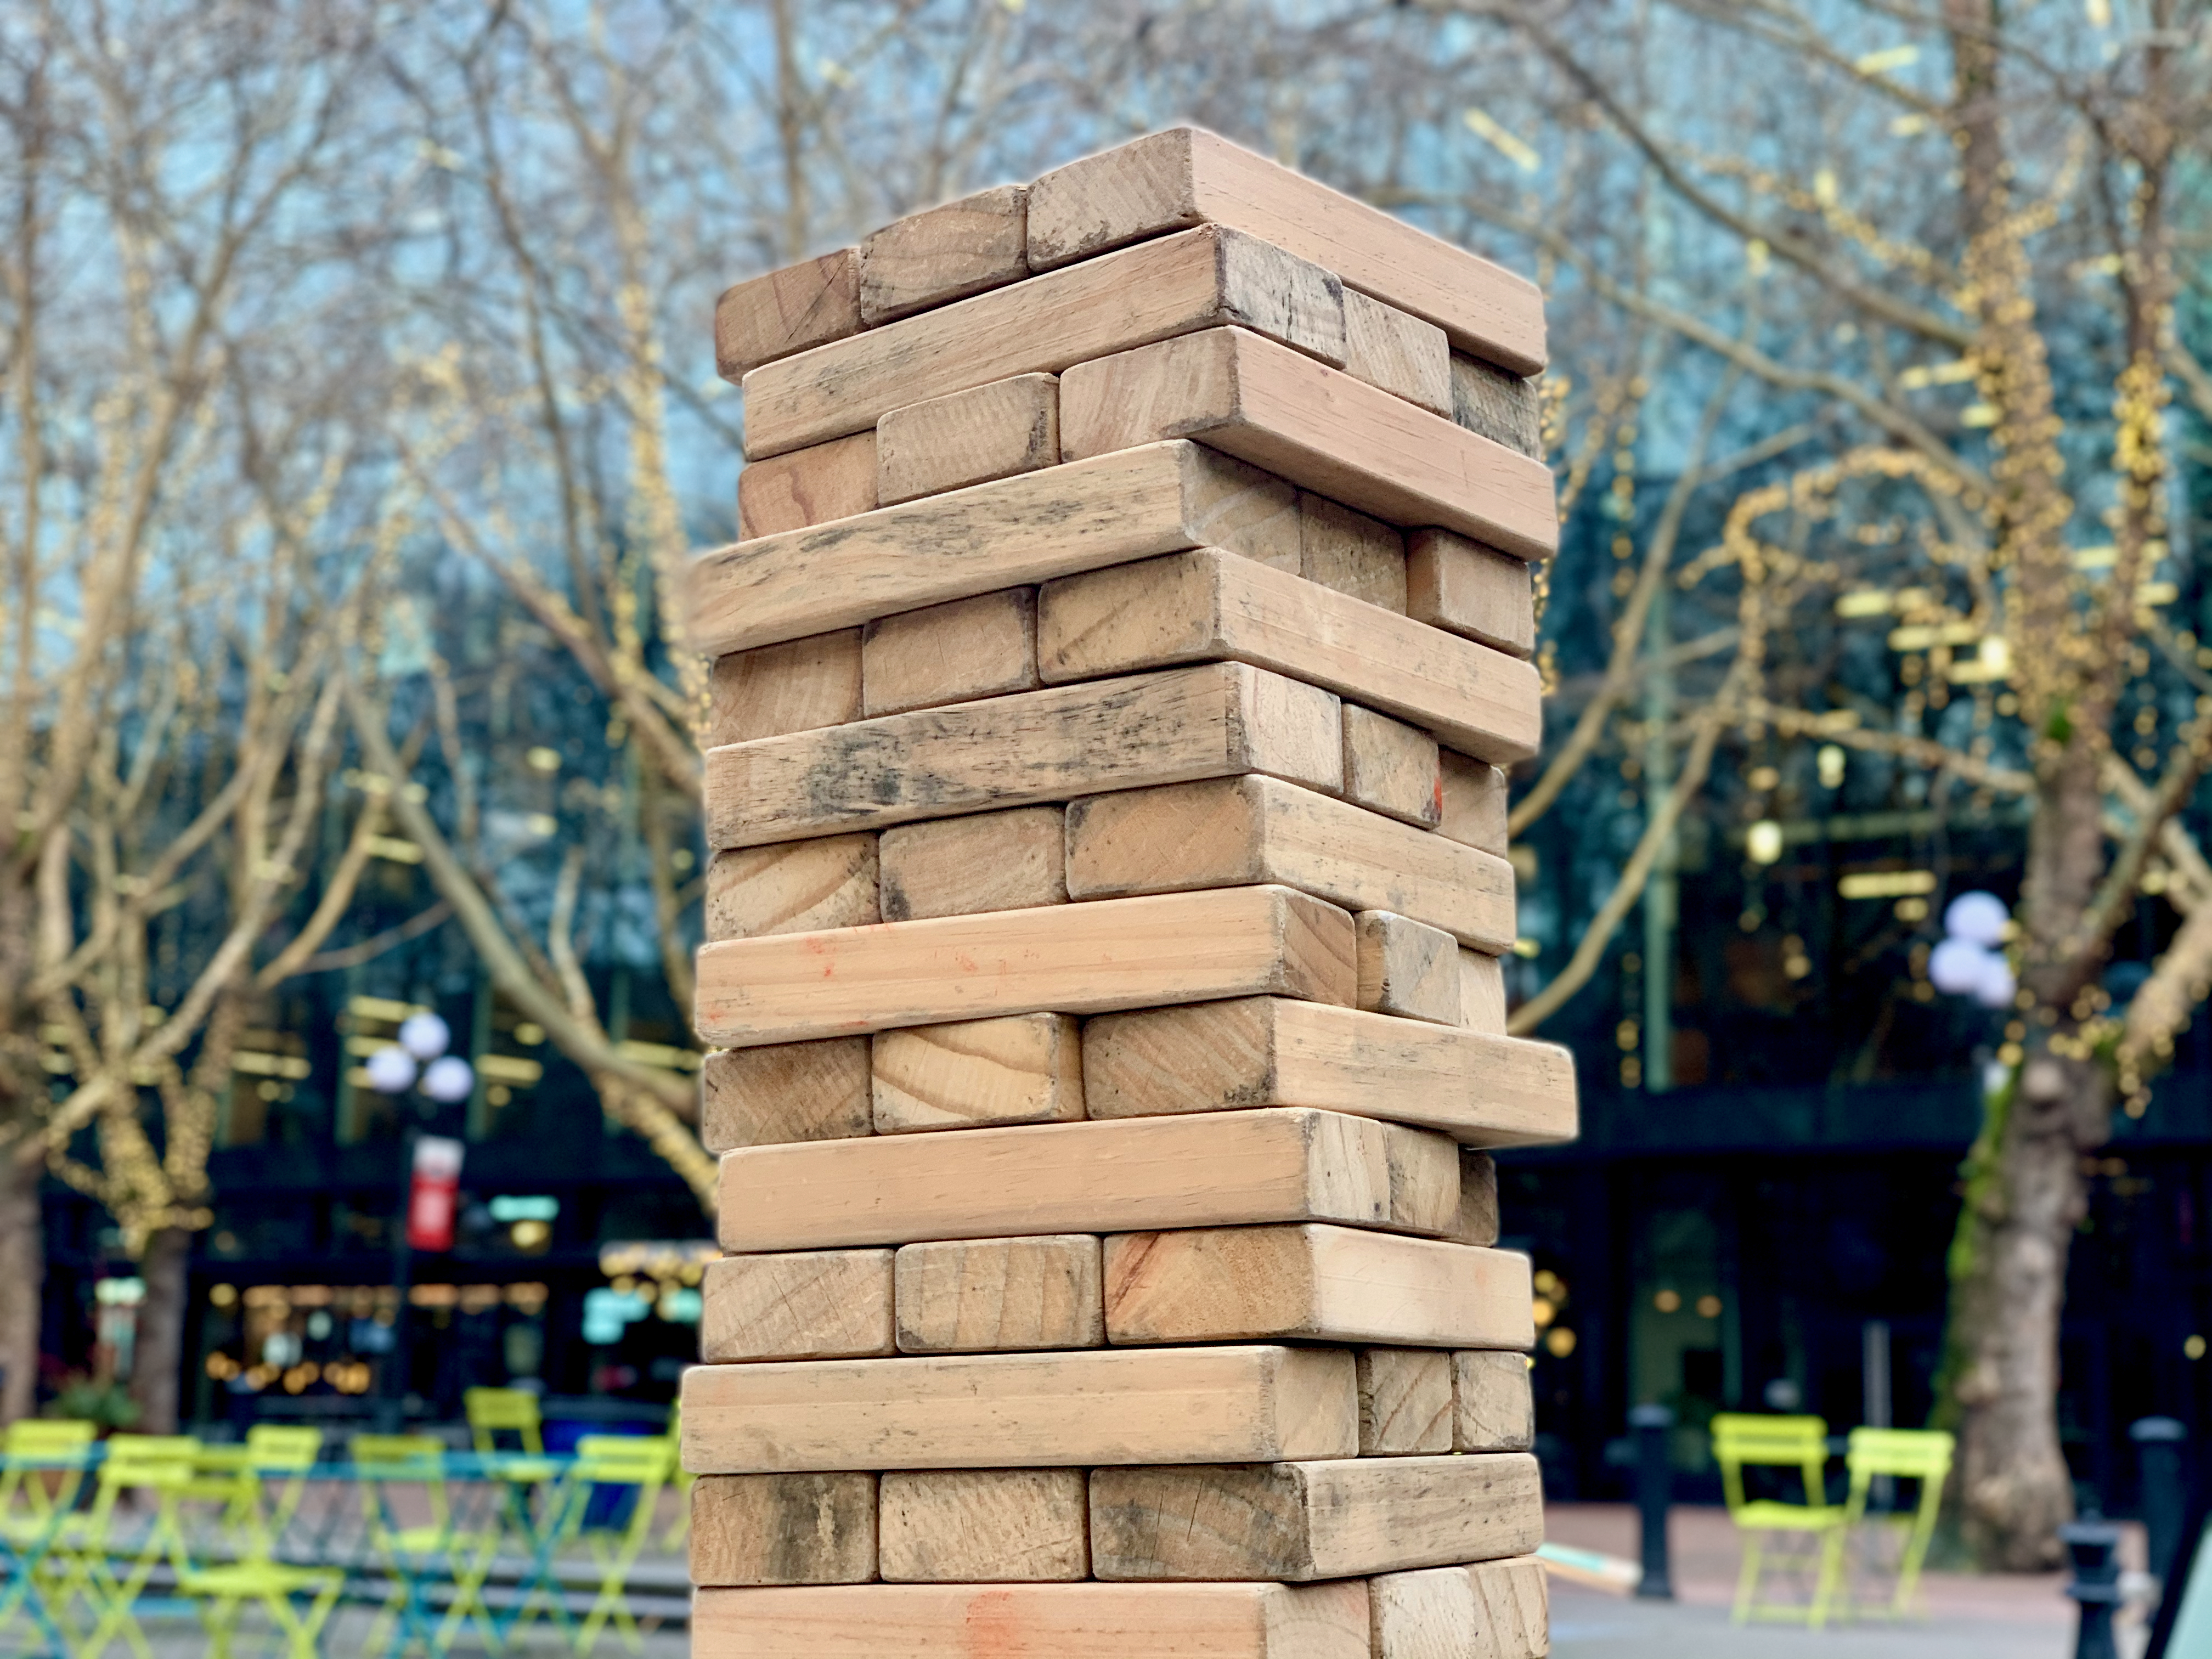 Day 15. <i>Balance</i>. A giant game of Jenga awaits at <a href="https://www.seattle.gov/parks/find/parks/occidental-square">Occidental Square</a>.